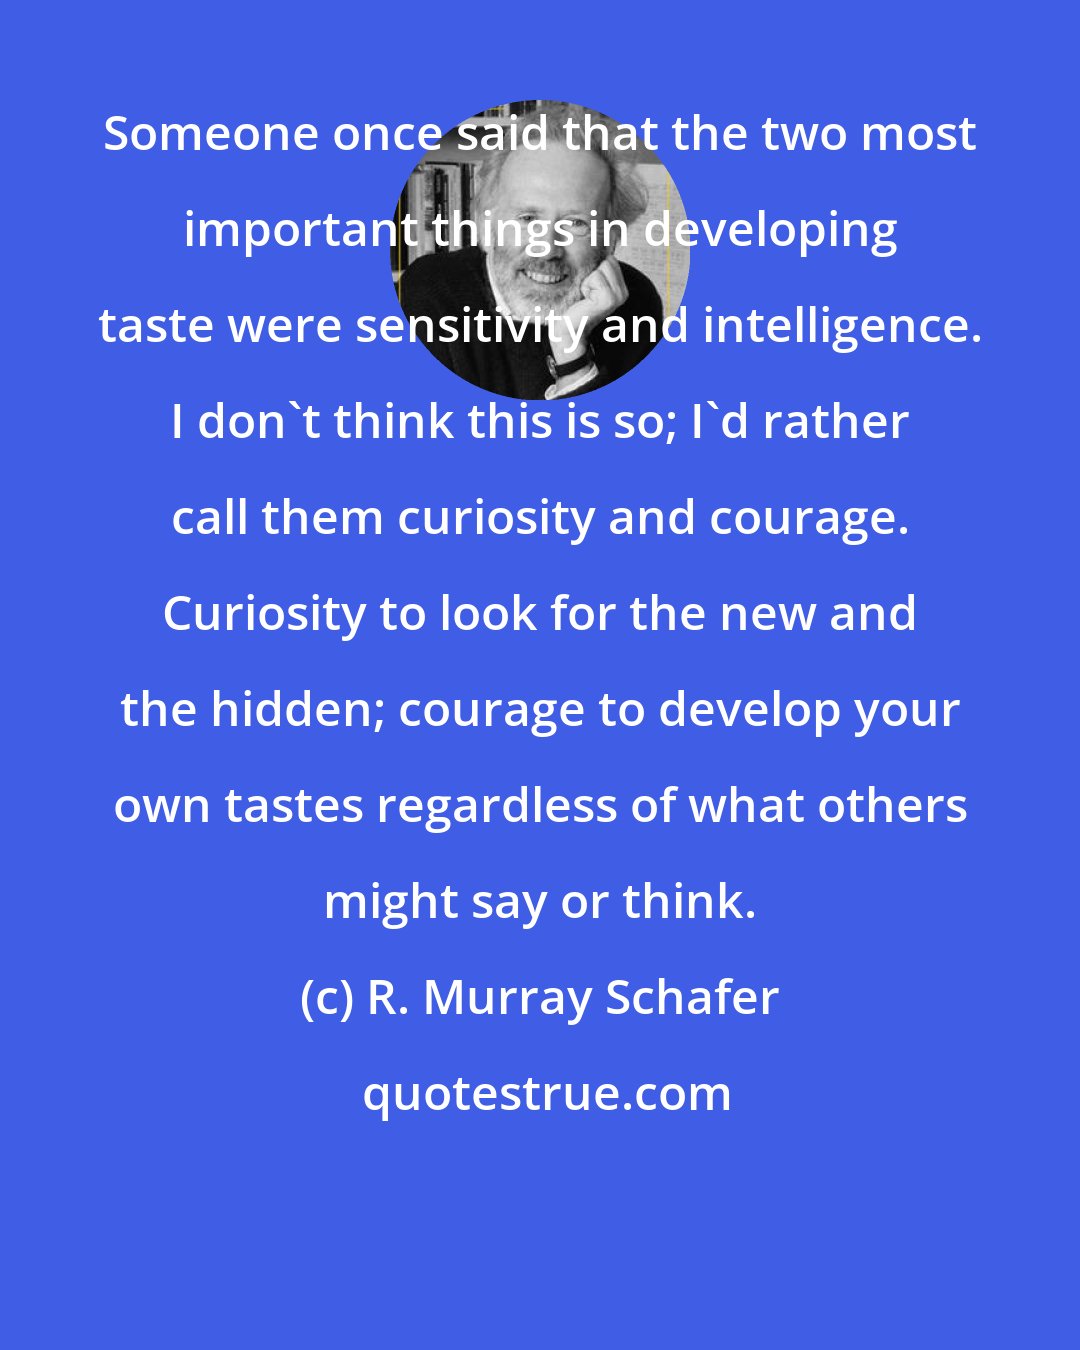 R. Murray Schafer: Someone once said that the two most important things in developing taste were sensitivity and intelligence. I don't think this is so; I'd rather call them curiosity and courage. Curiosity to look for the new and the hidden; courage to develop your own tastes regardless of what others might say or think.